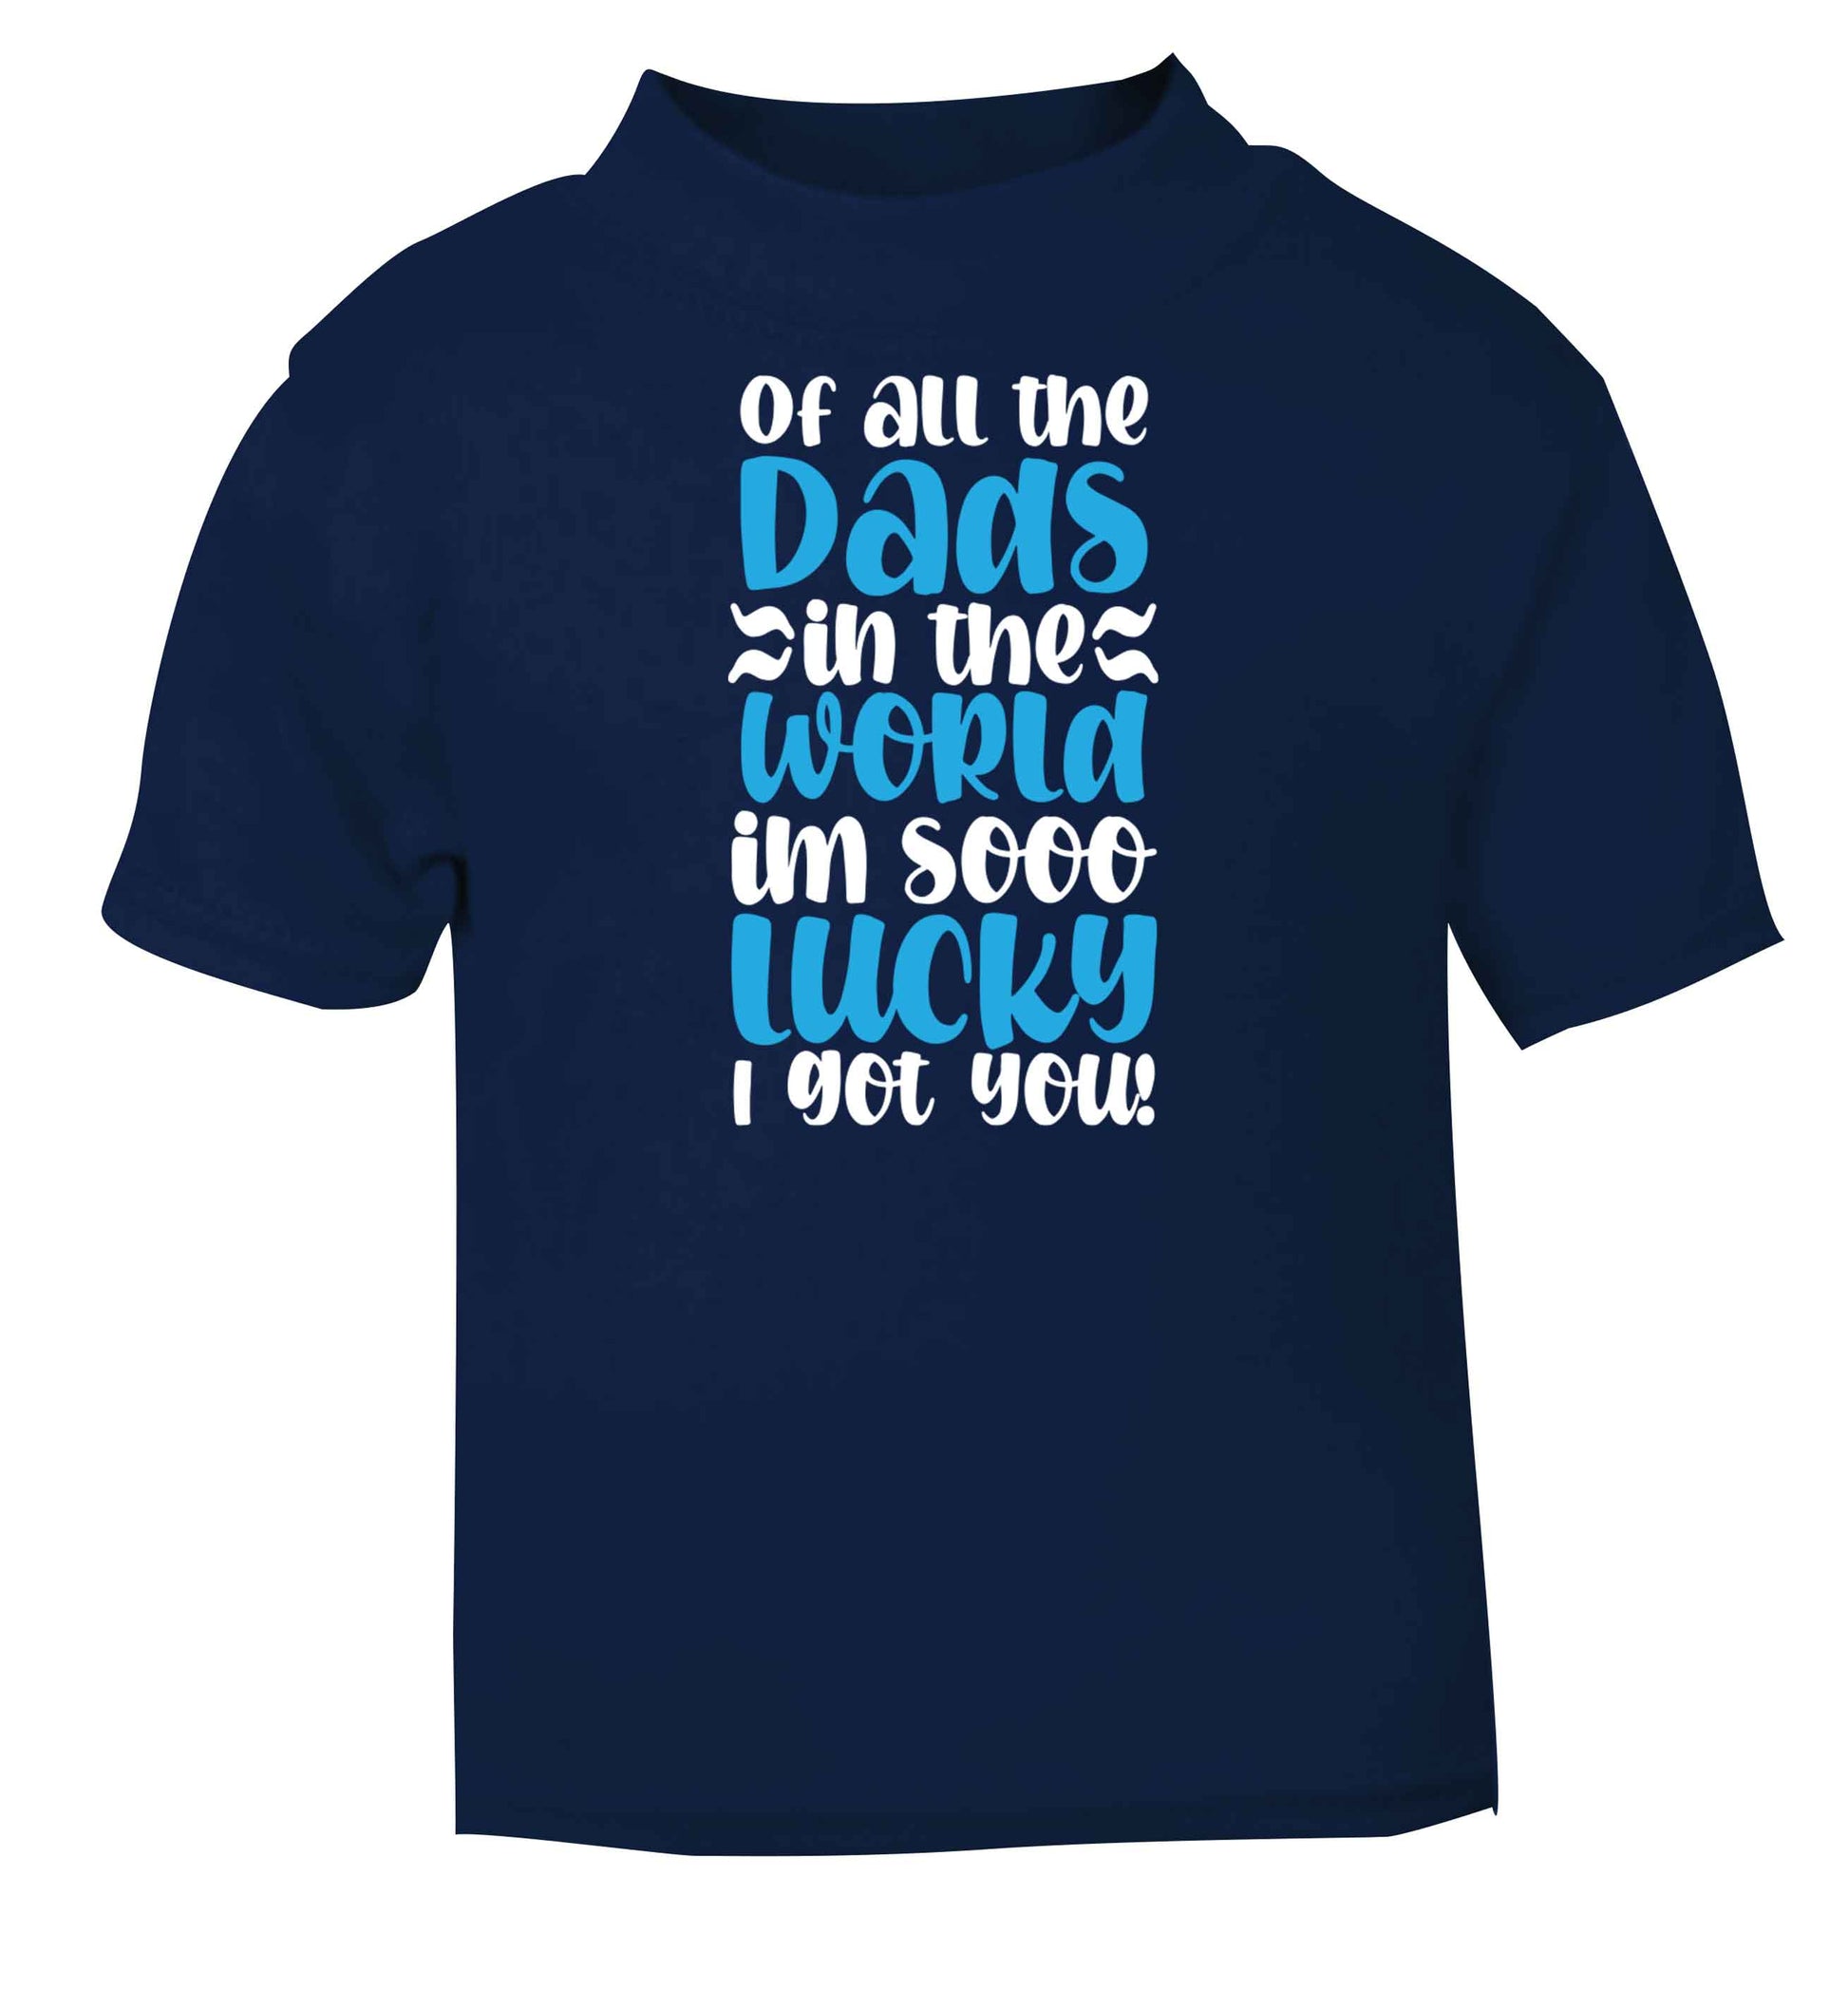 I'm as lucky as can be the worlds greatest dad belongs to me! navy baby toddler Tshirt 2 Years